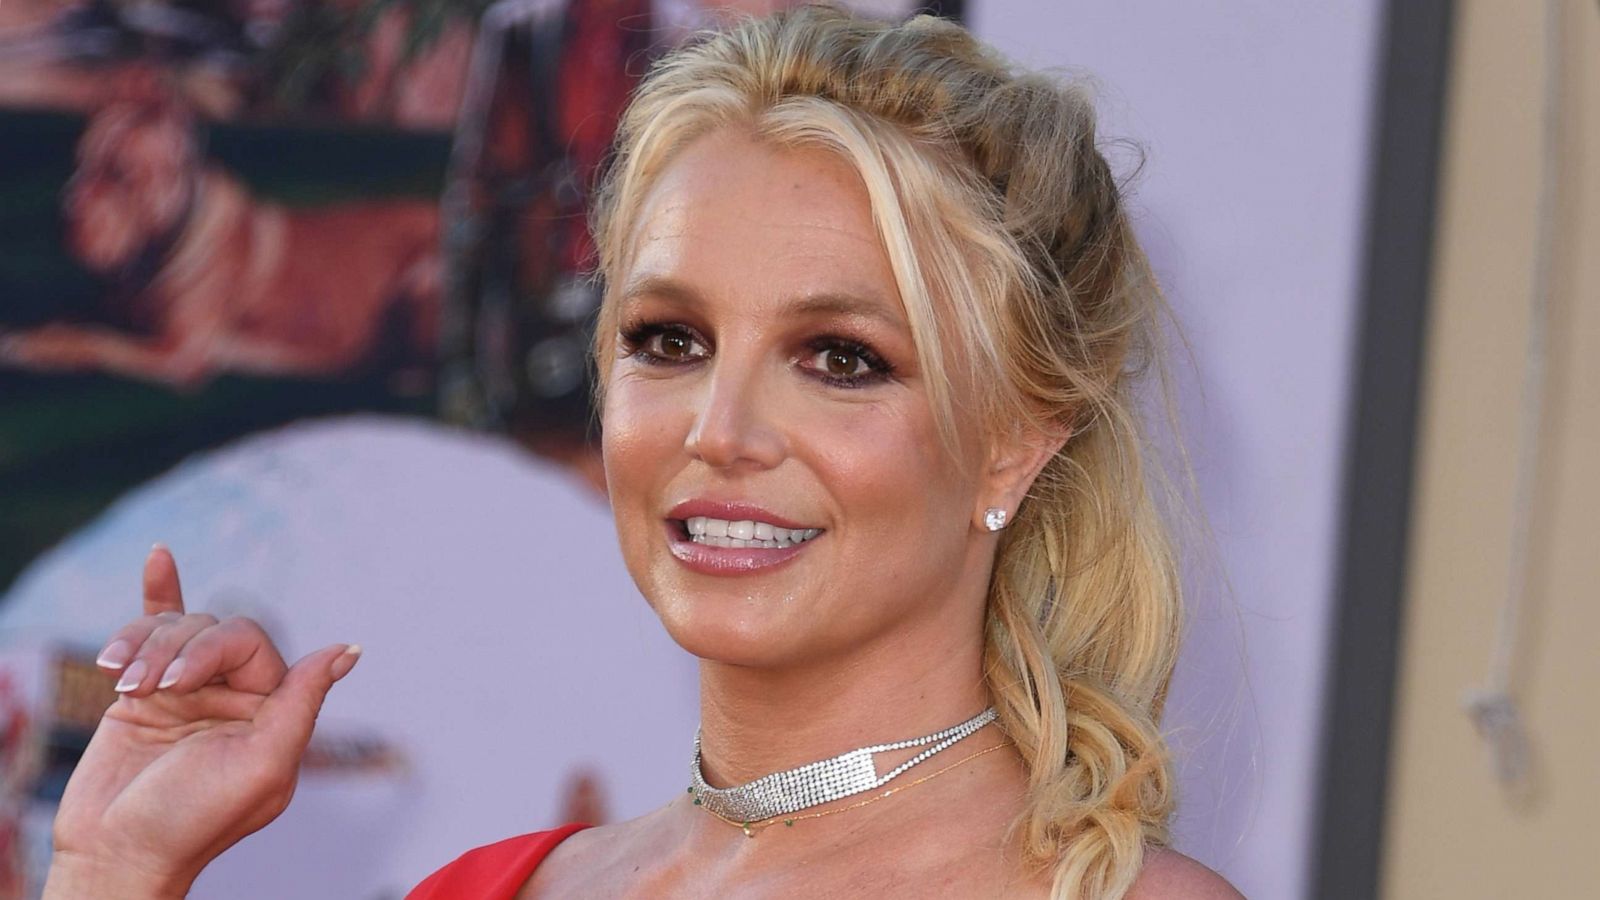 PHOTO: Singer Britney Spears arrives for a film premiere in Hollywood, Calif., July 22, 2019.